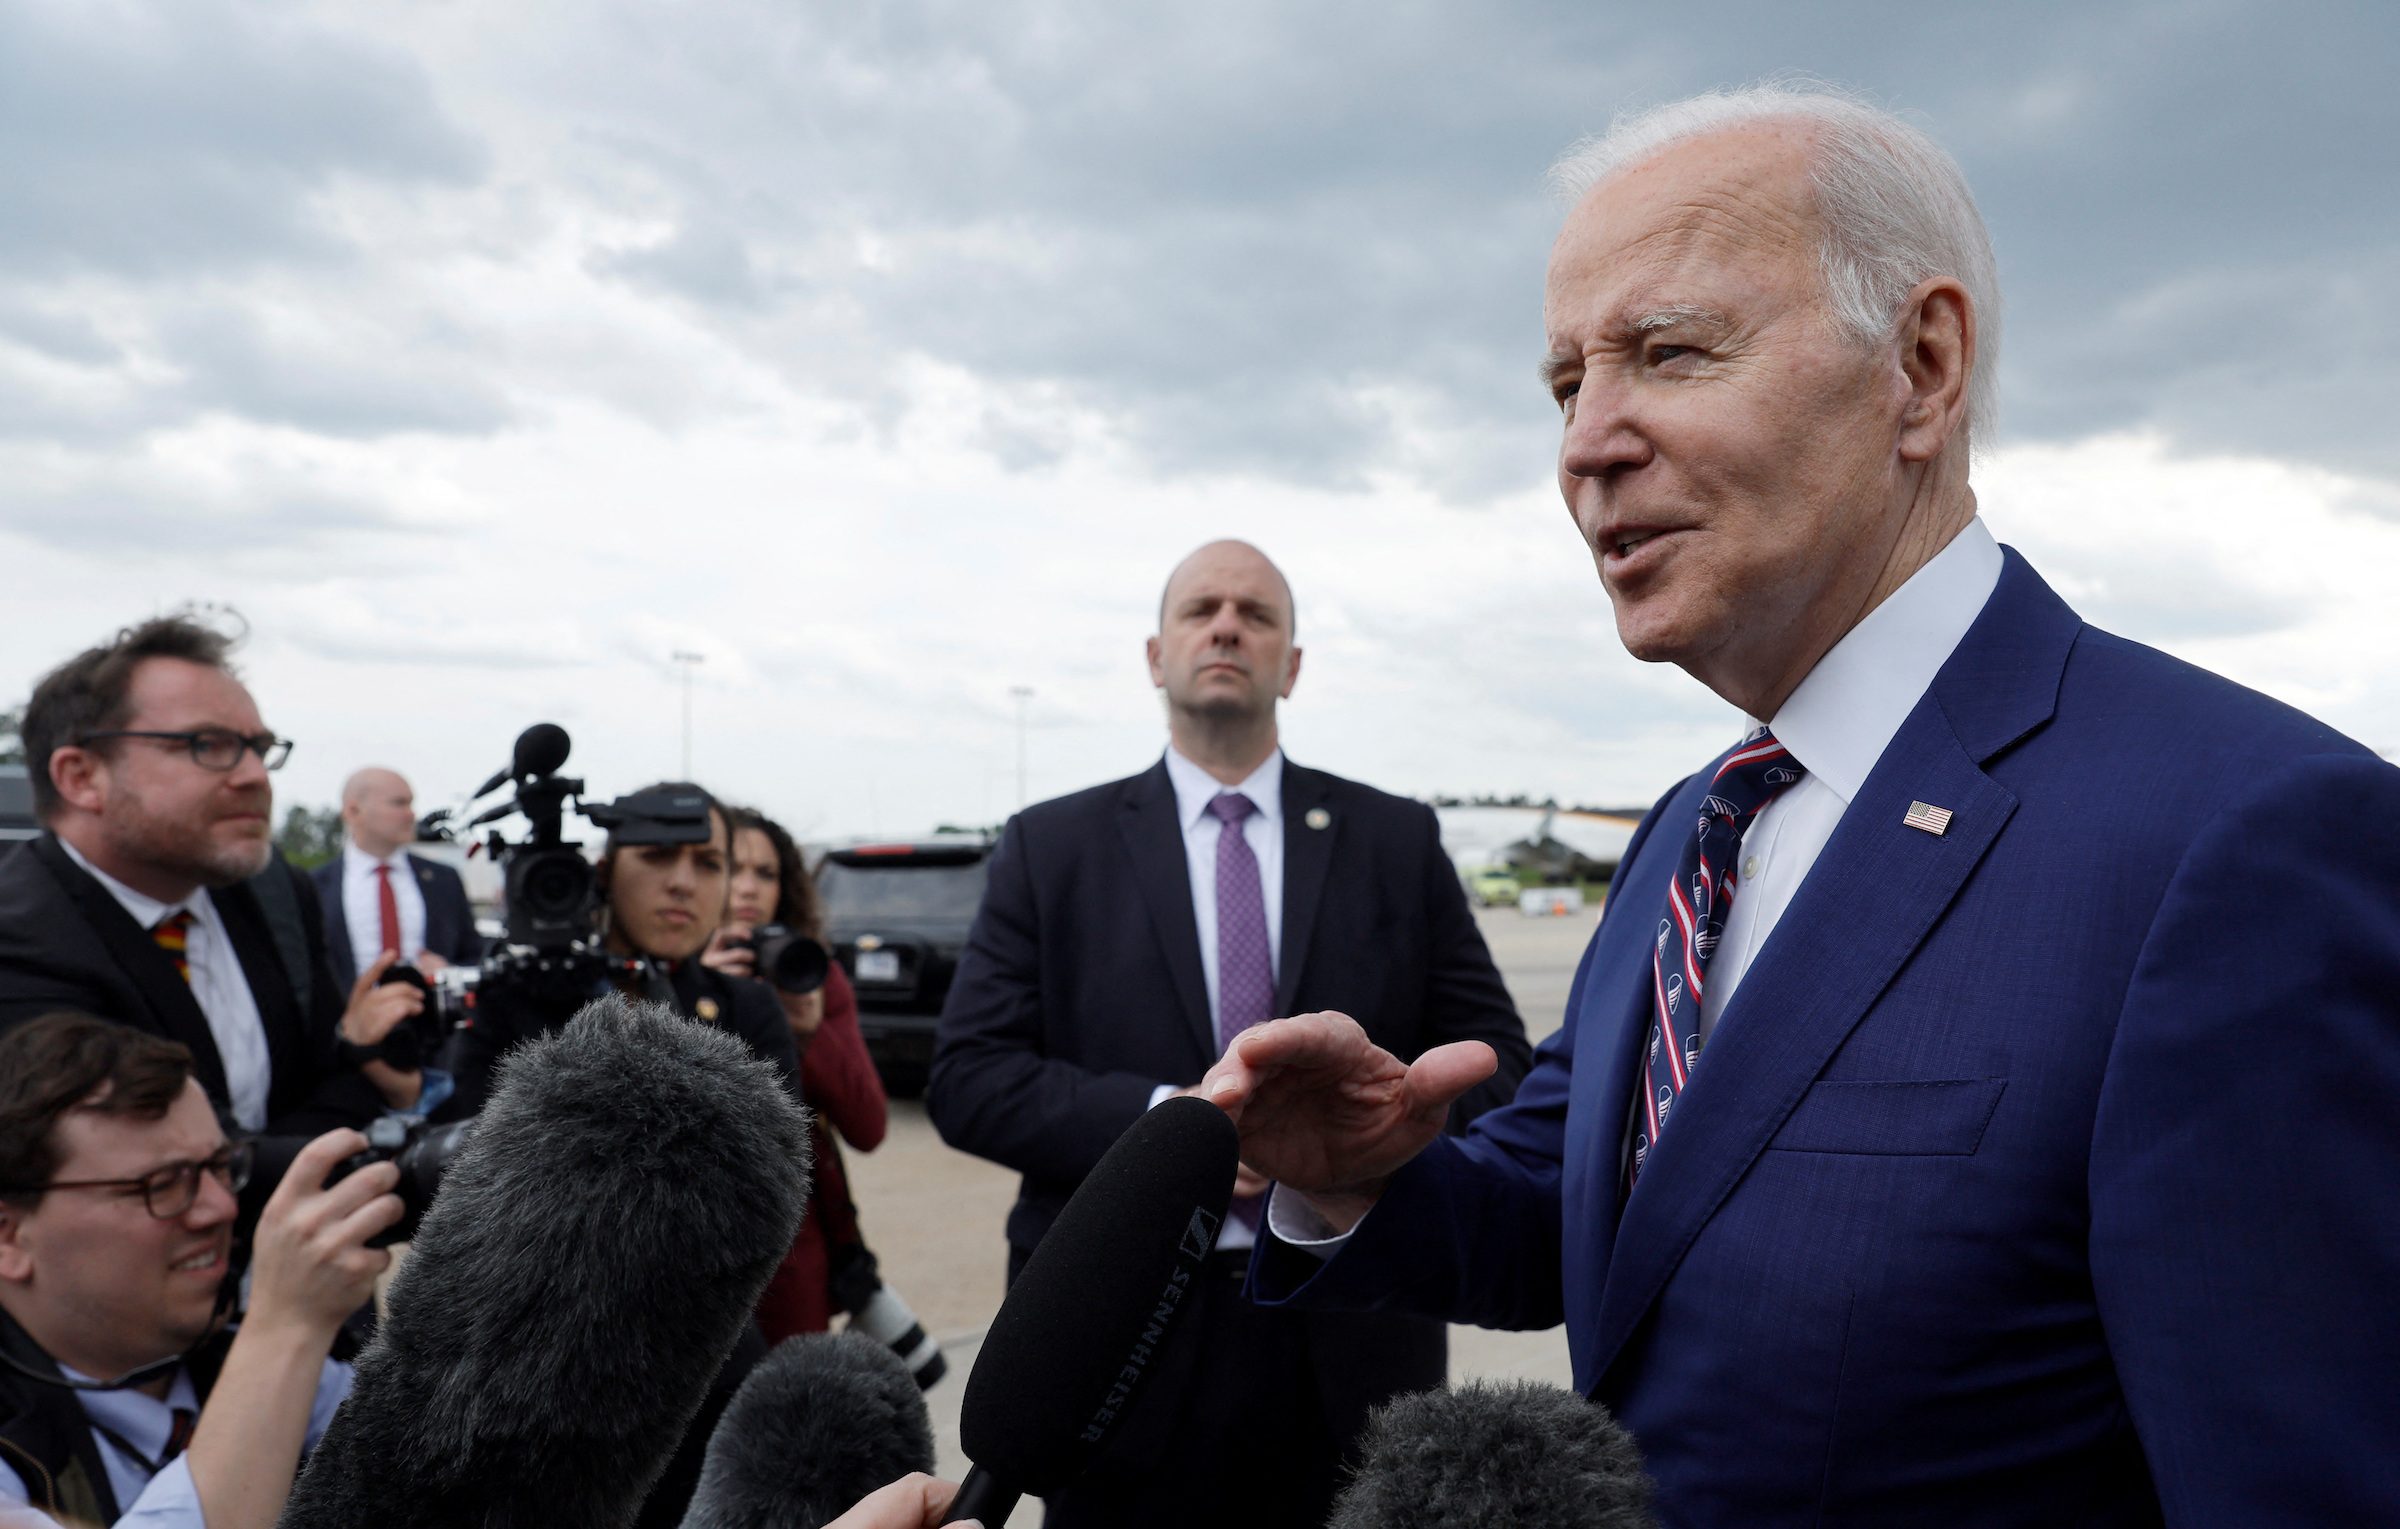 Biden says White House response to banking stress is ‘not over yet’